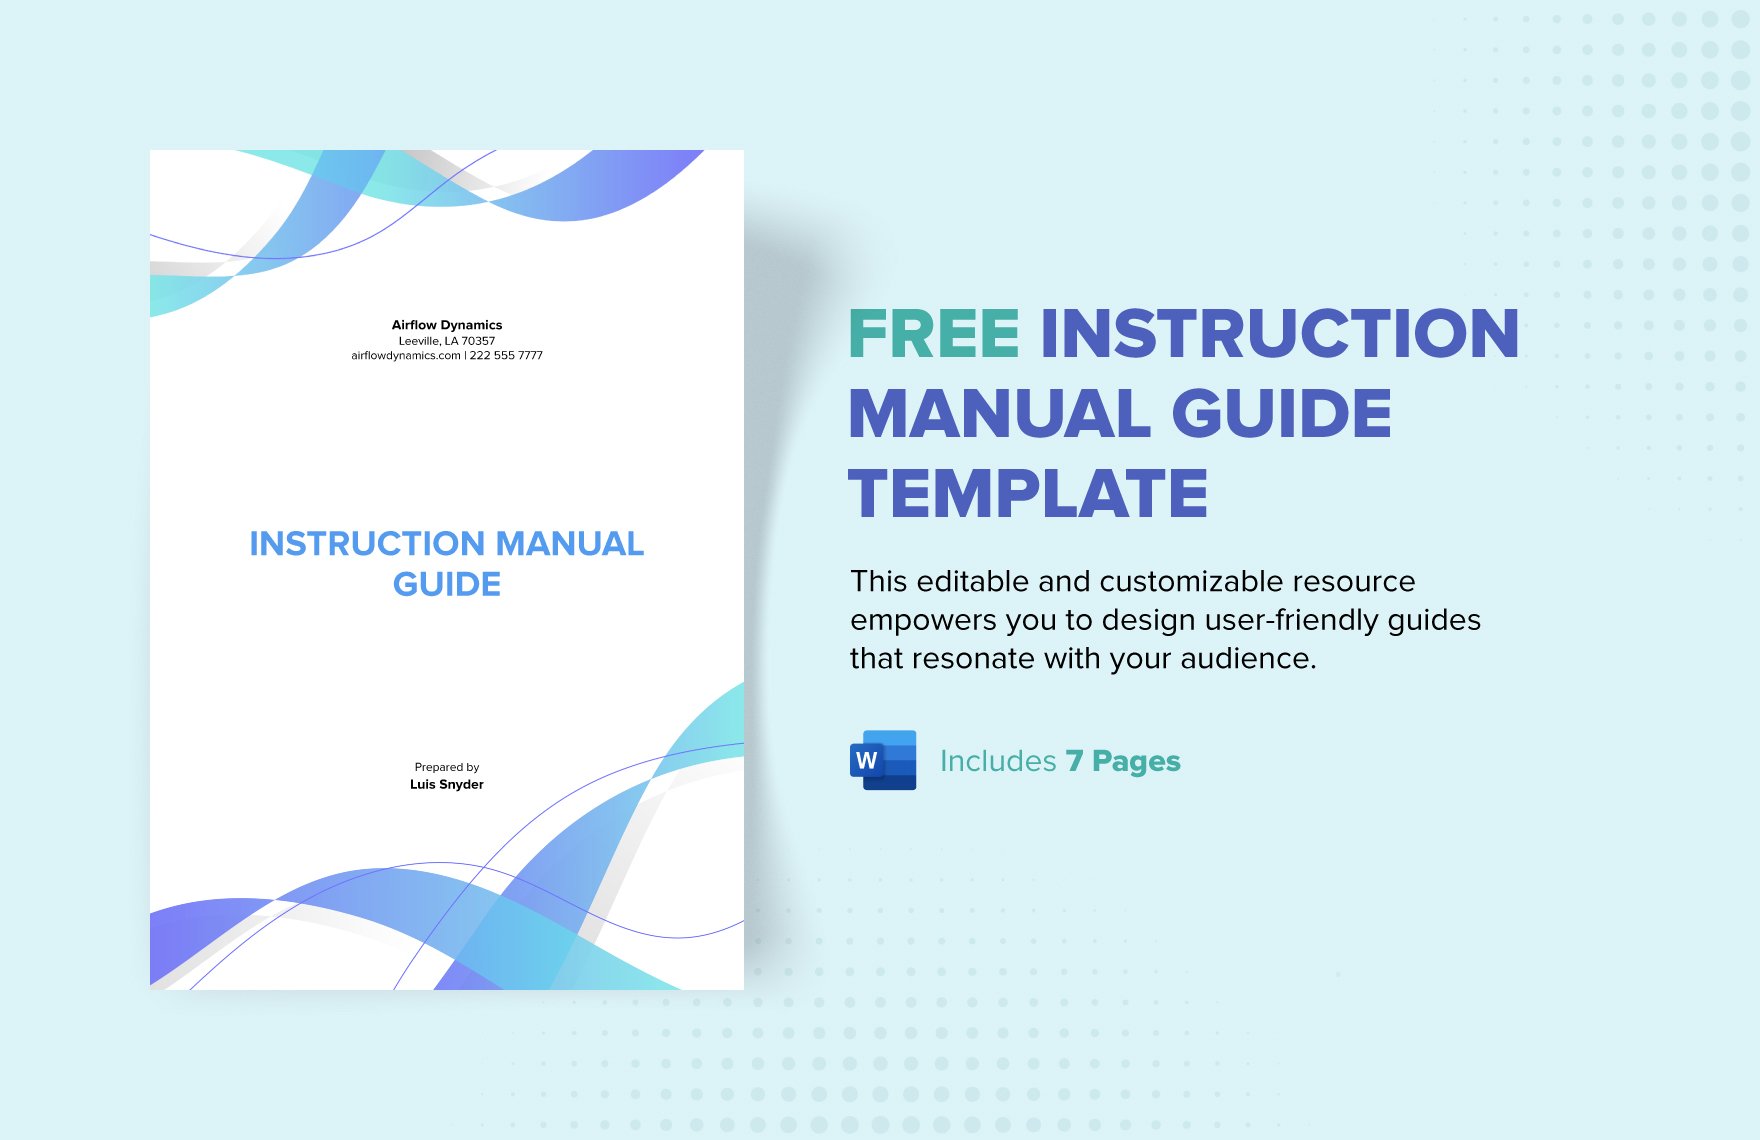 Free Instruction Manual Guide Template in Word